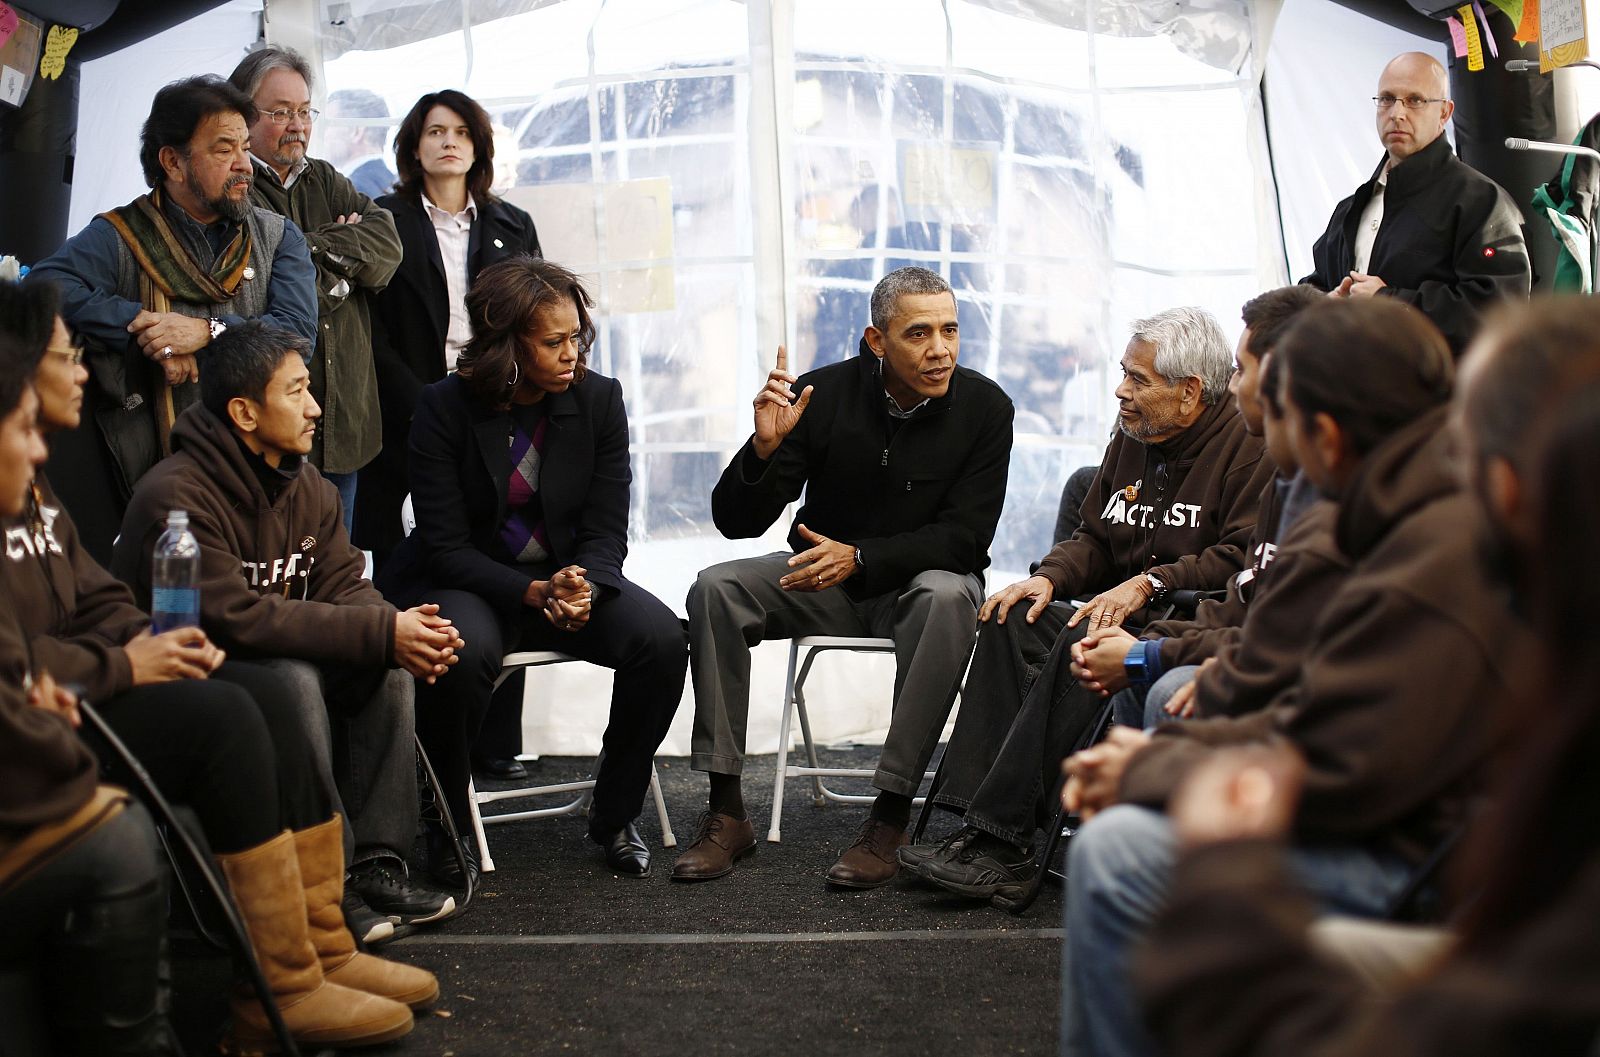 U.S. President Barack Obama and first lady Michelle Obama meet with protesters fasting for immigration reform in a tent on the Washingon Mall